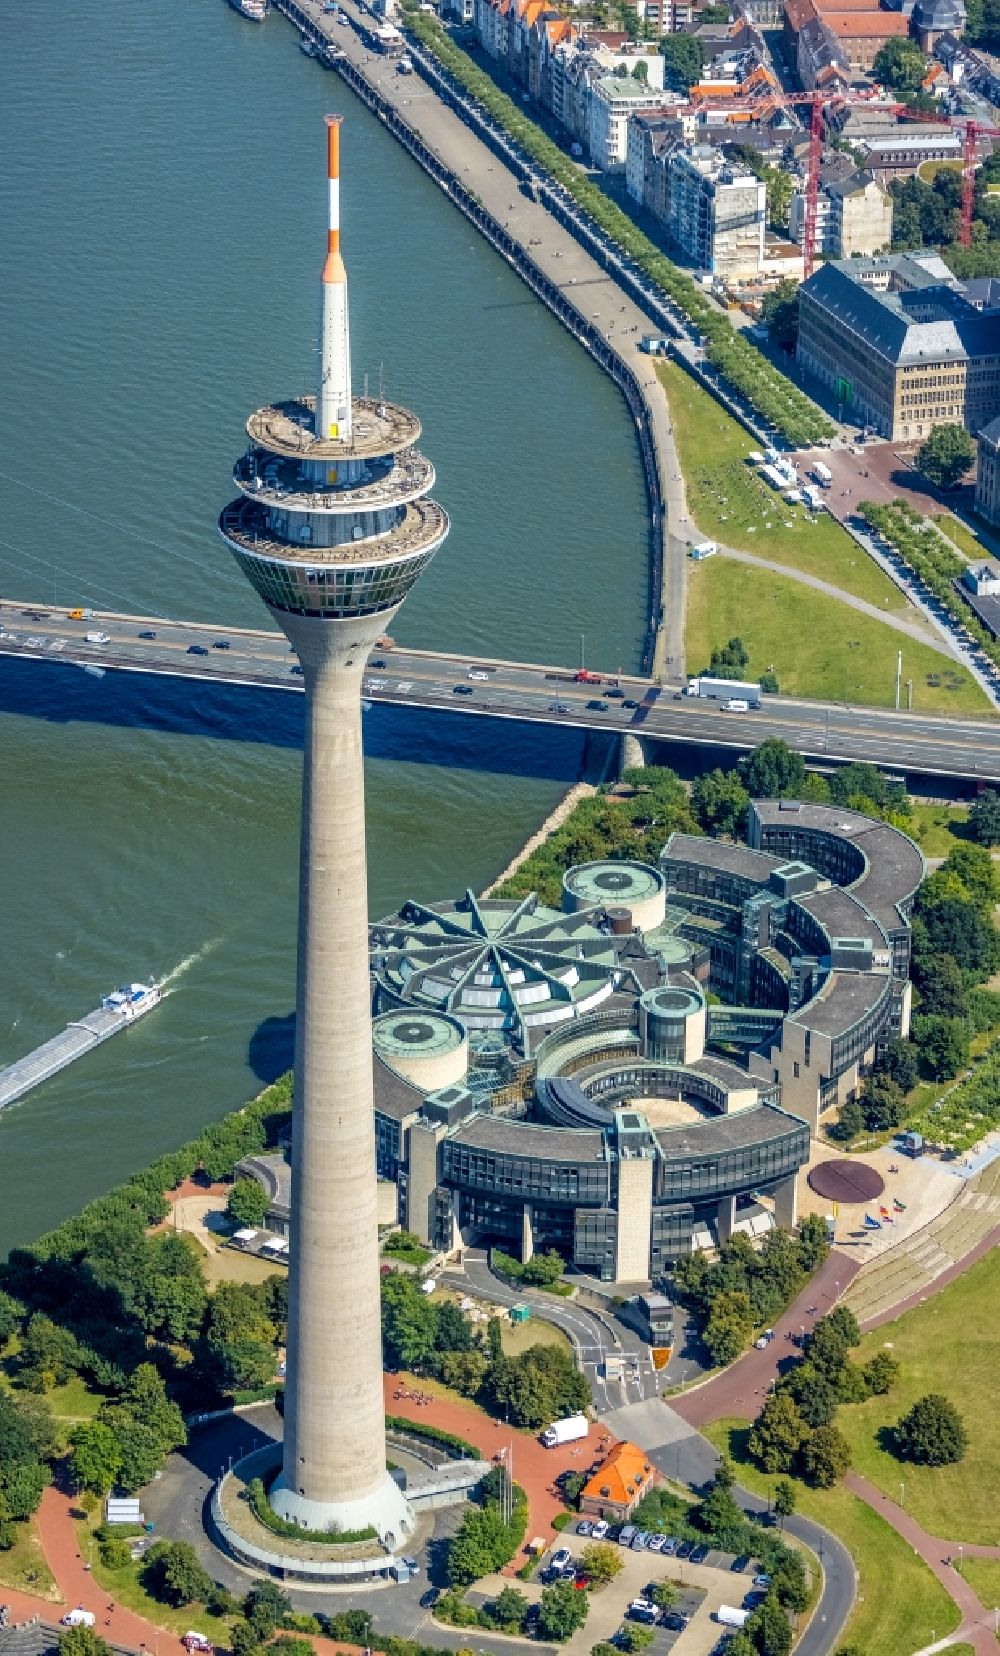 Aerial image Düsseldorf - Top of the Television Tower Rheinturm with the city center in the background in Duesseldorf in the state North Rhine-Westphalia